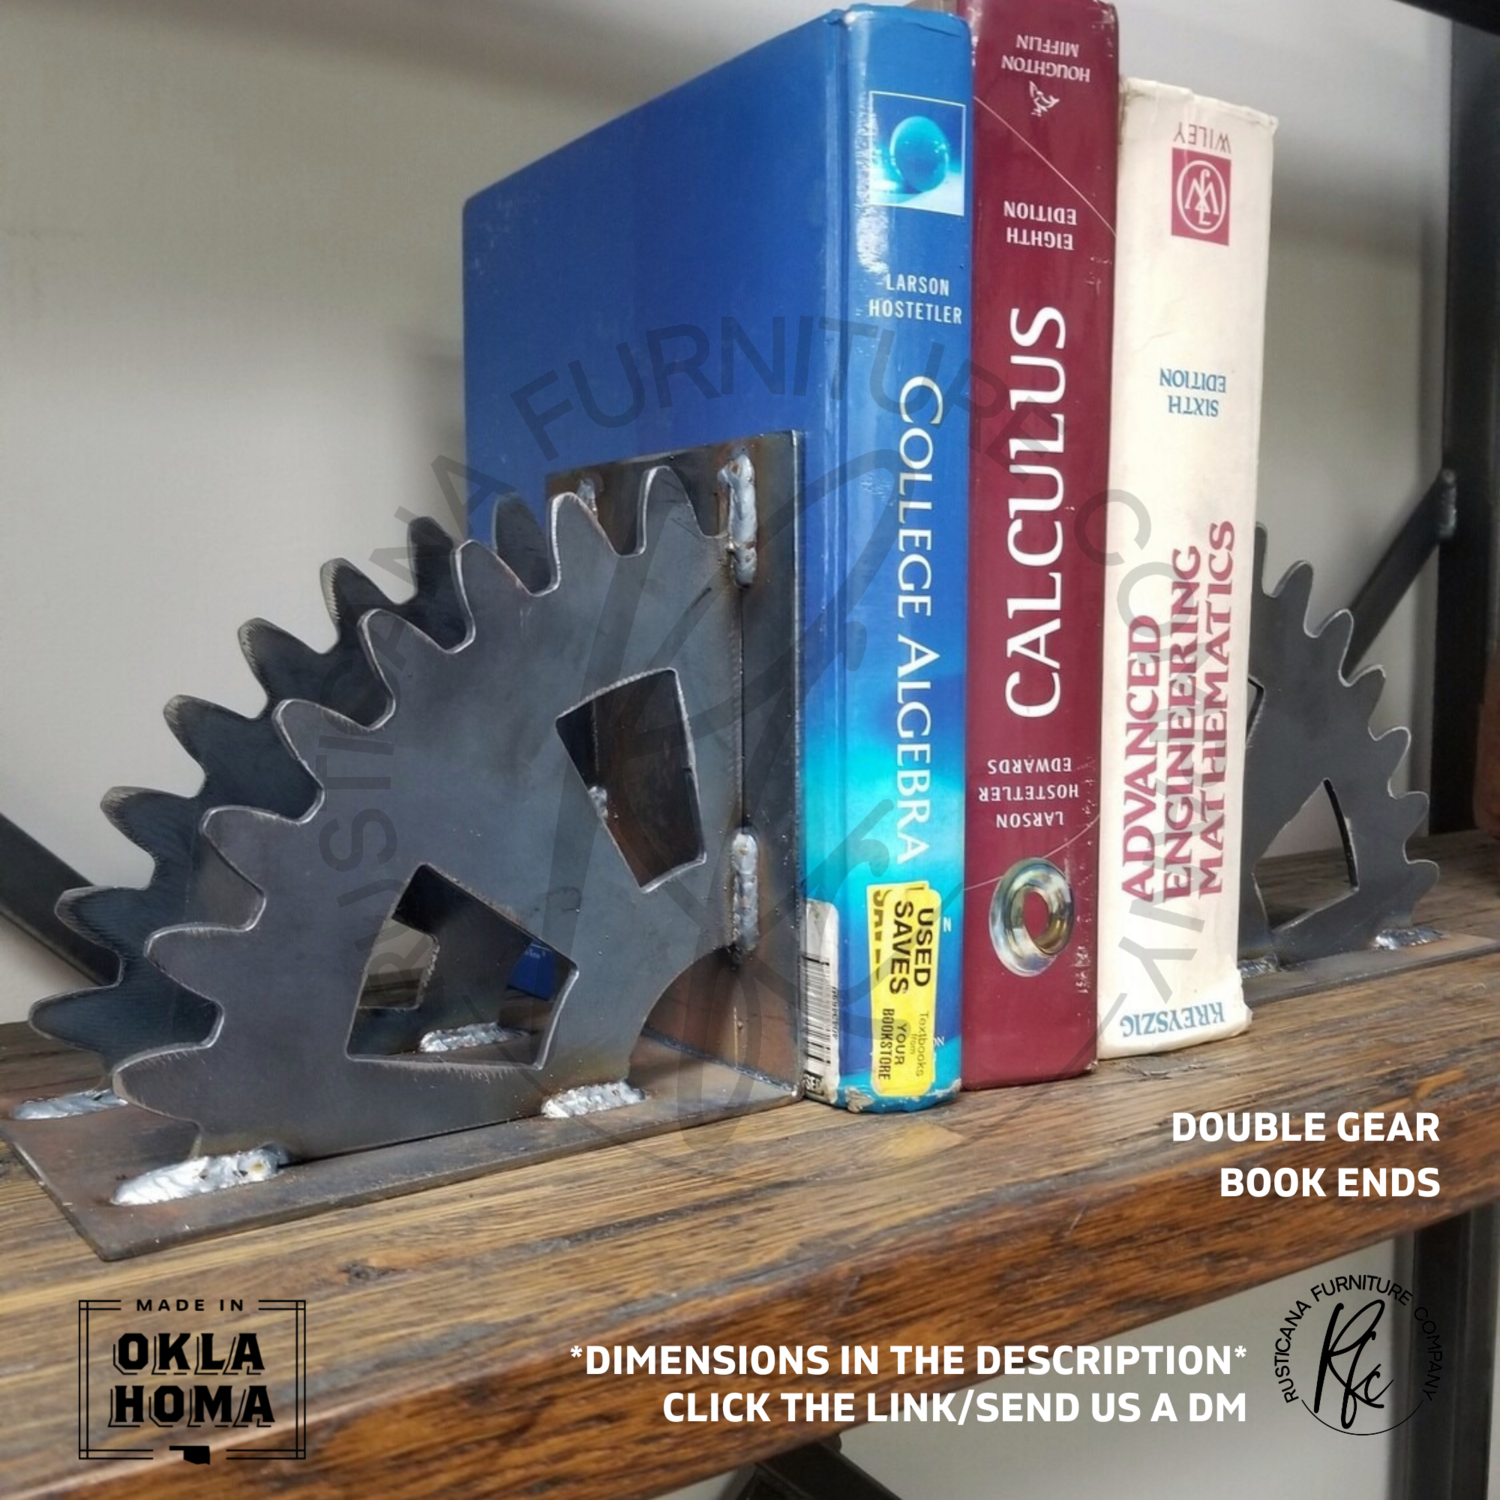 Double Gear Book Ends